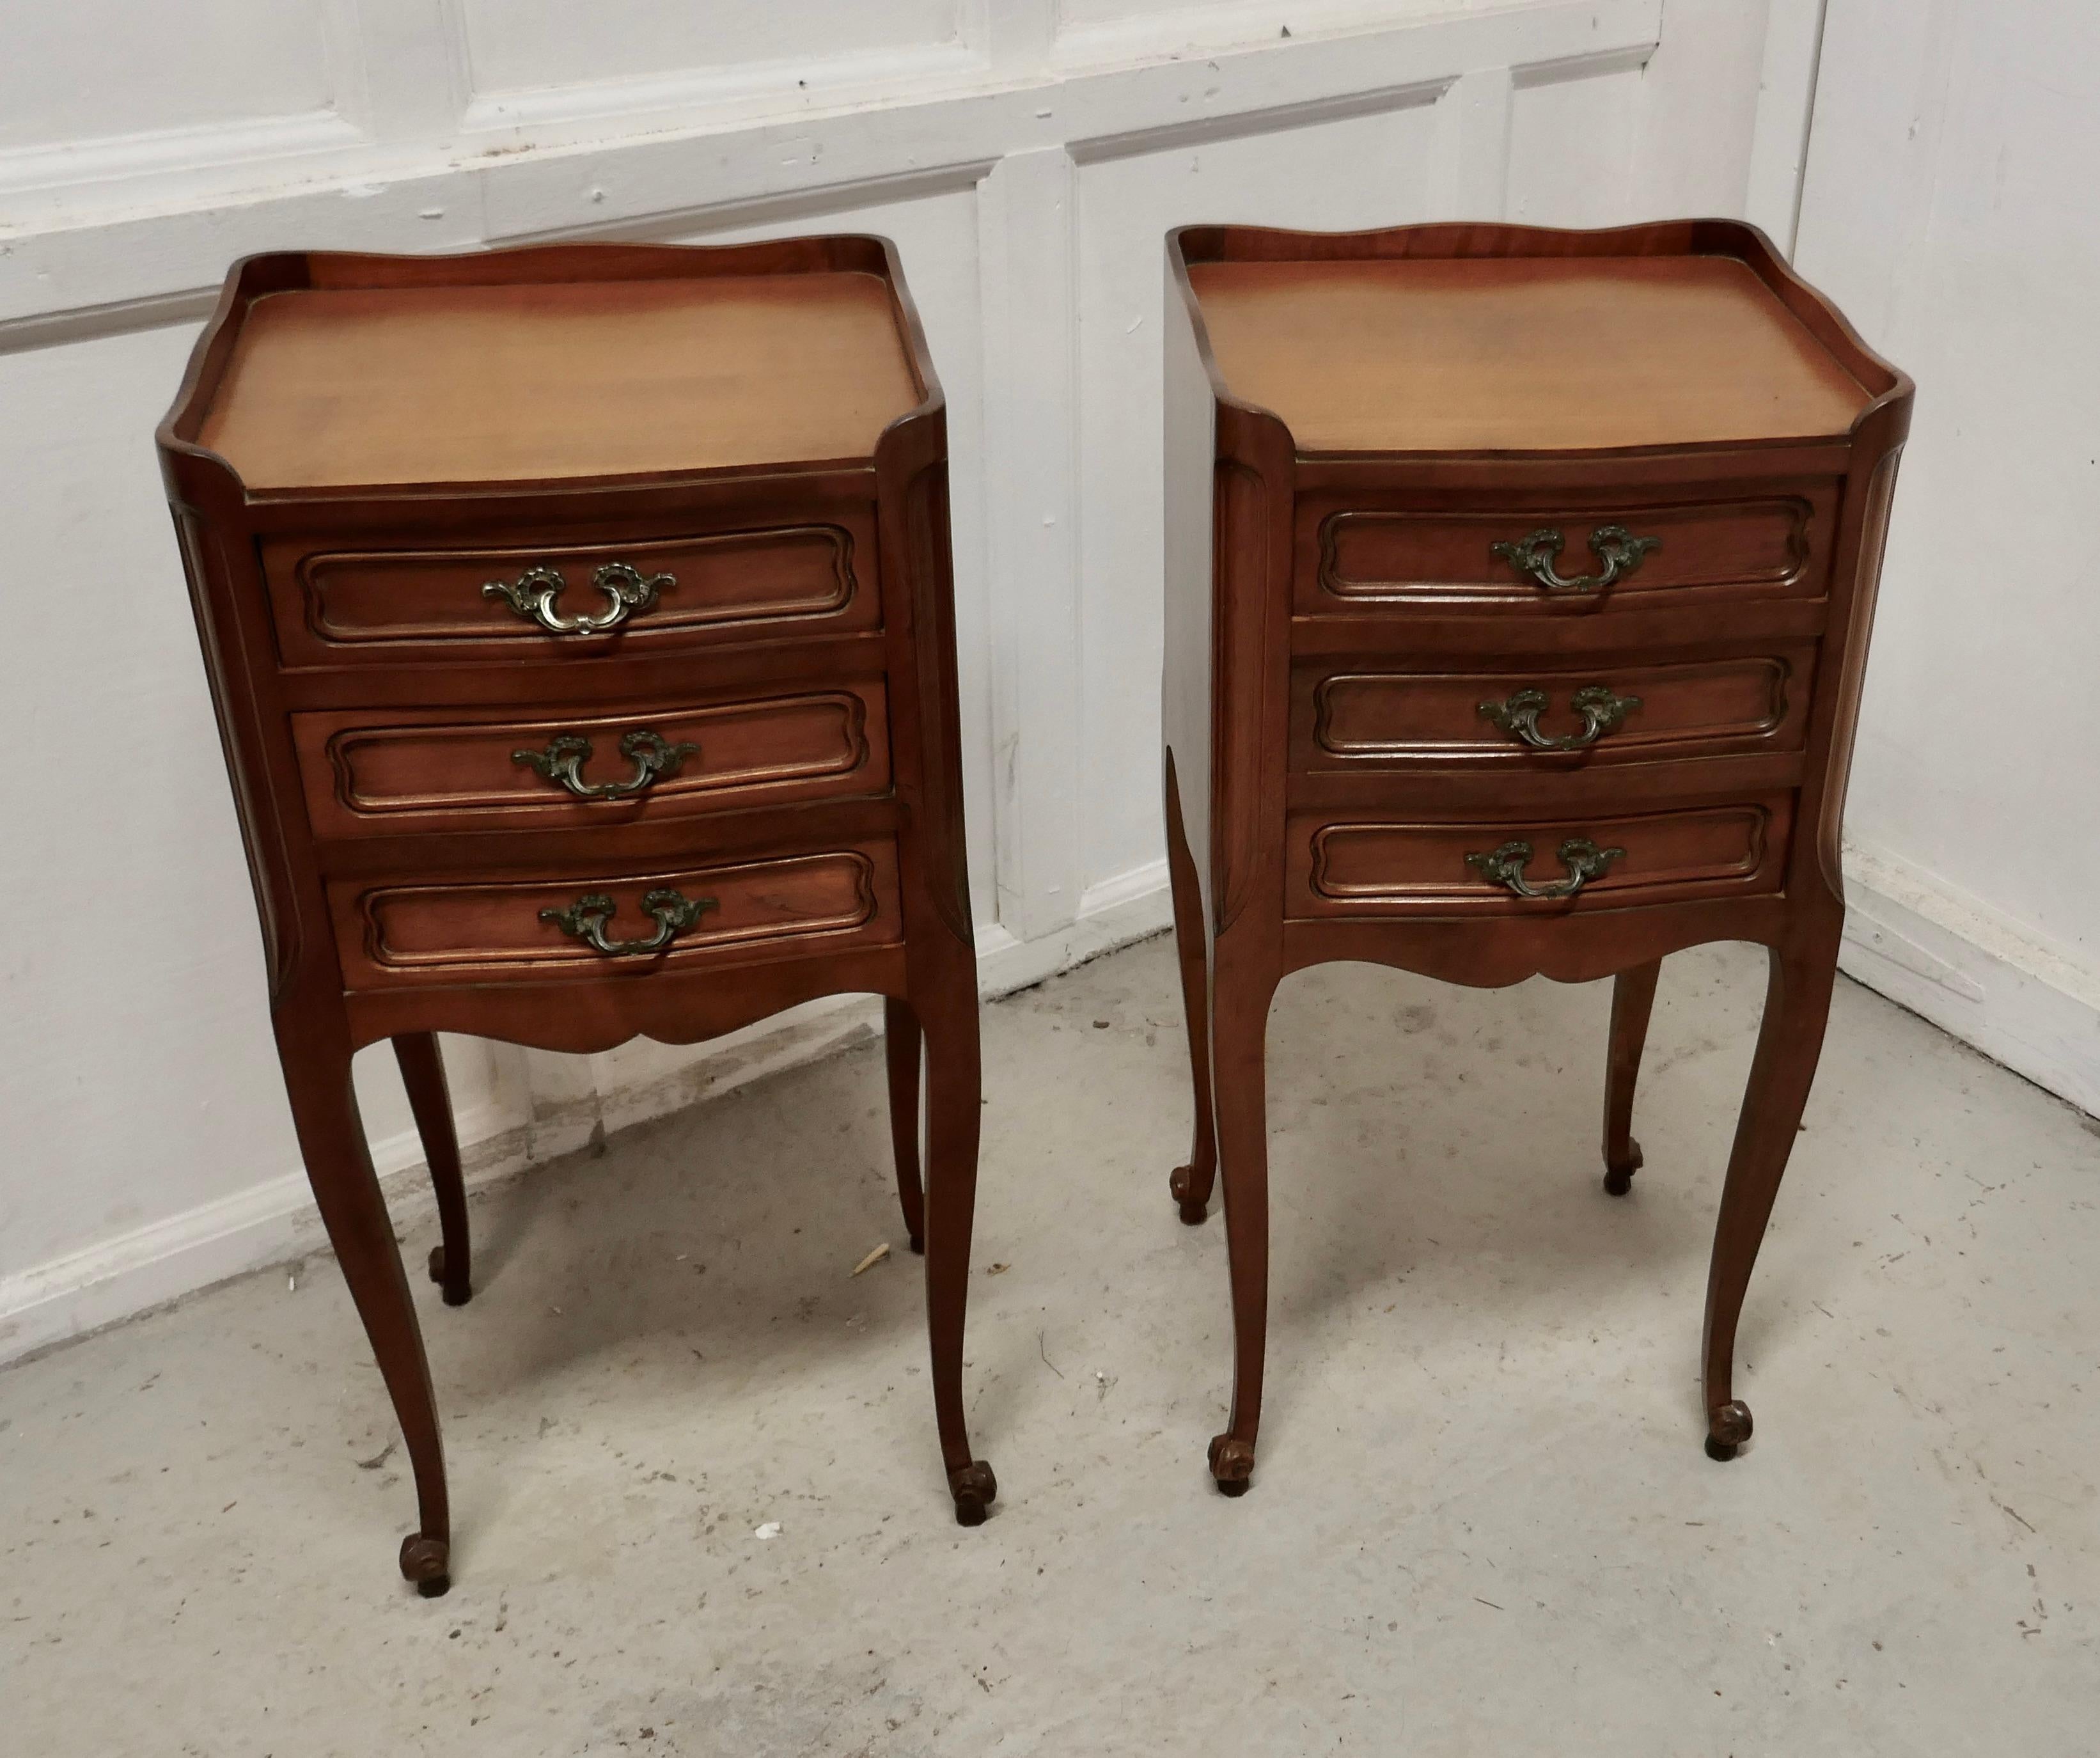 Pair of French. 3-drawer cherrywood bedside cabinets

This is a pretty pair of cabinets or chevets, they have a small gallery around the top, small and they stand on cabriole legs
Each cabinet has a 3 drawers and ormolu handles
The cabinets are